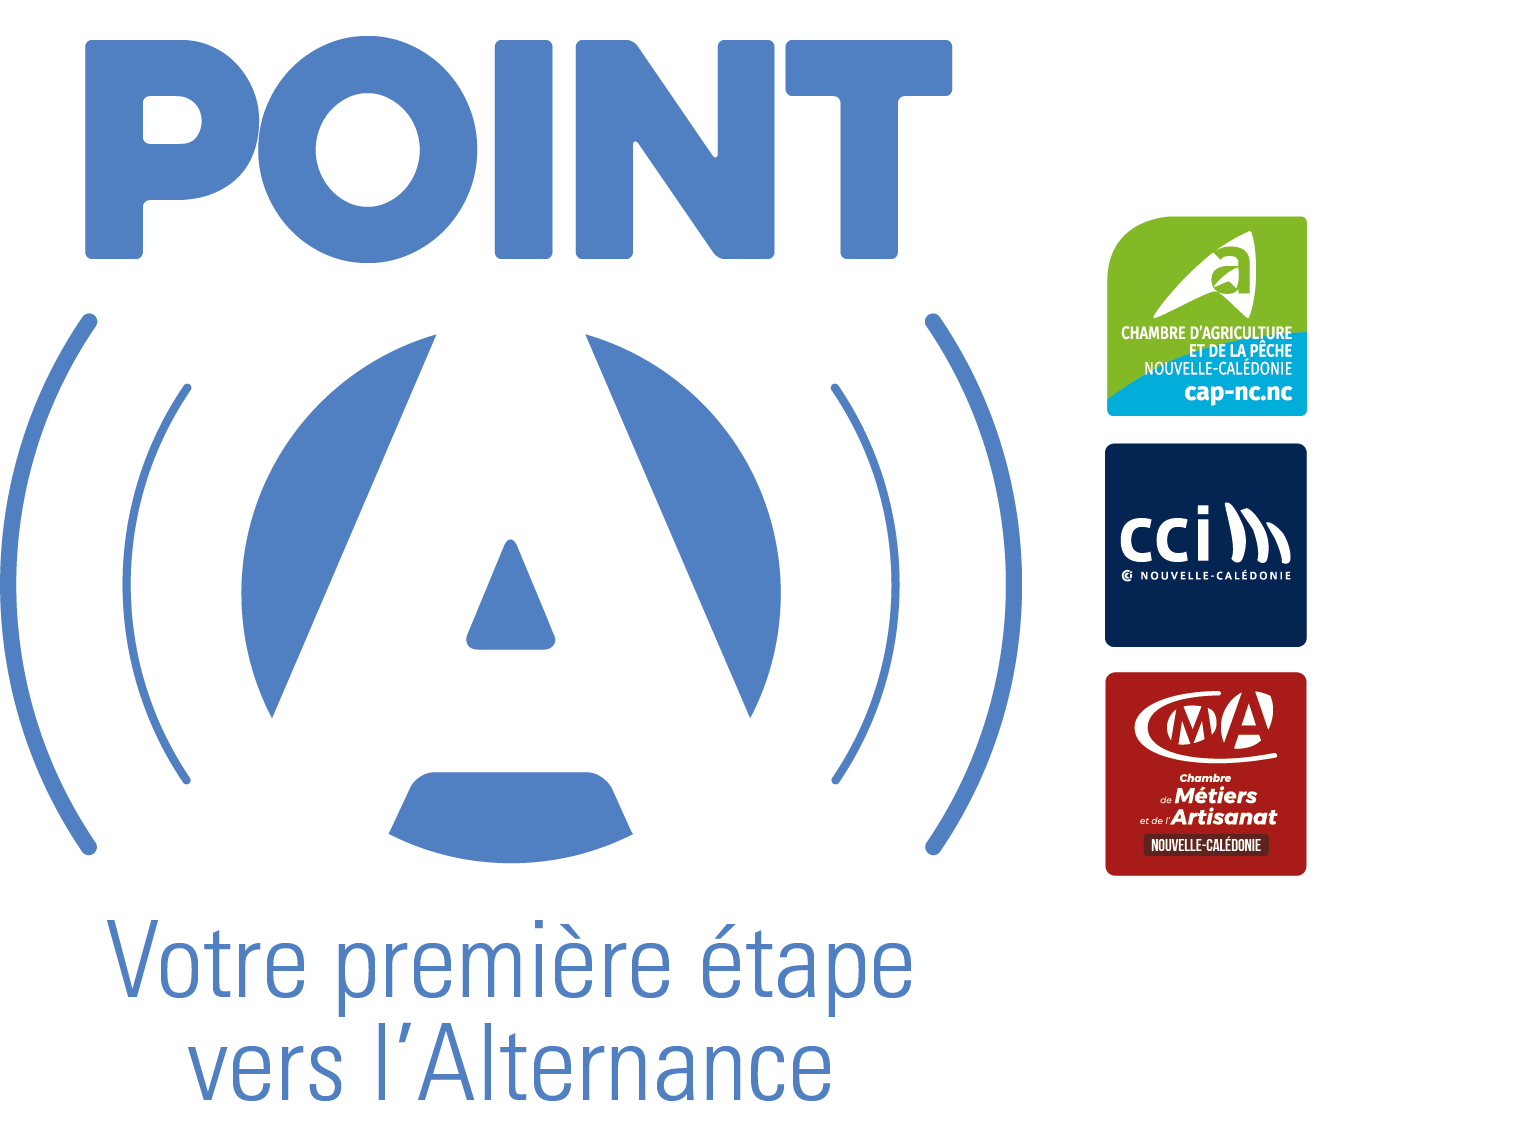 Point A